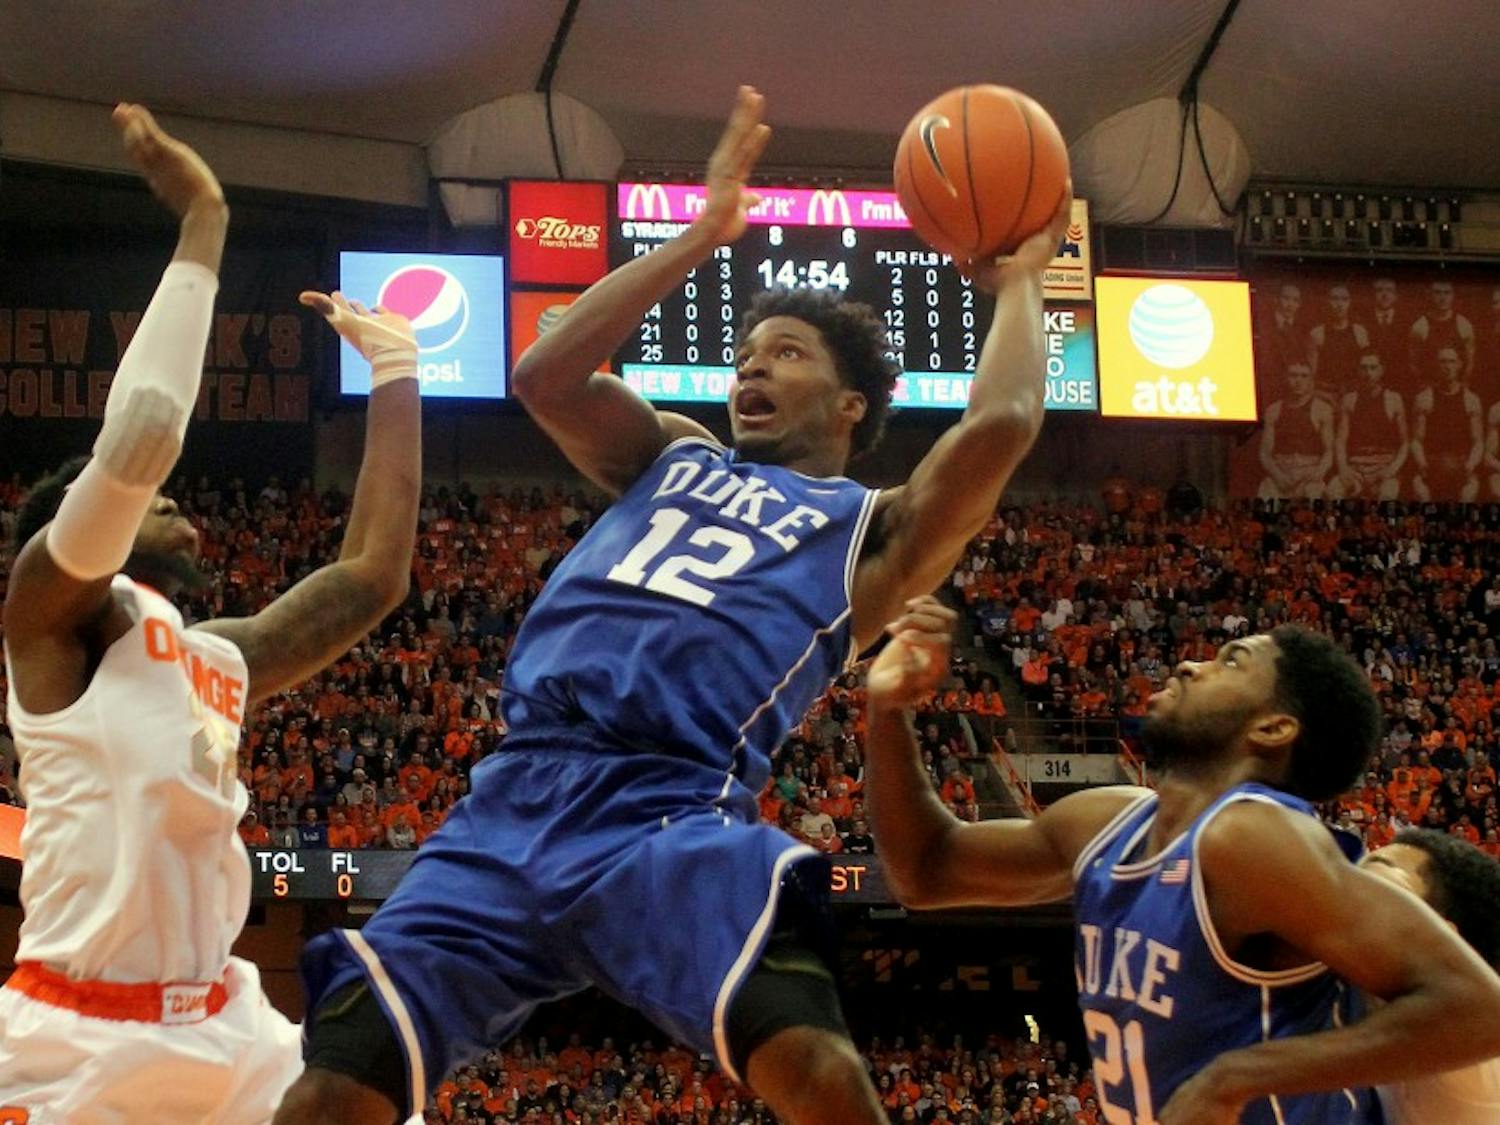 No. 4 Duke's first win at the Carrier Dome vs. Syracuse as an ACC foe did not come easily and was the next chapter in what could be another great conference rivalry.